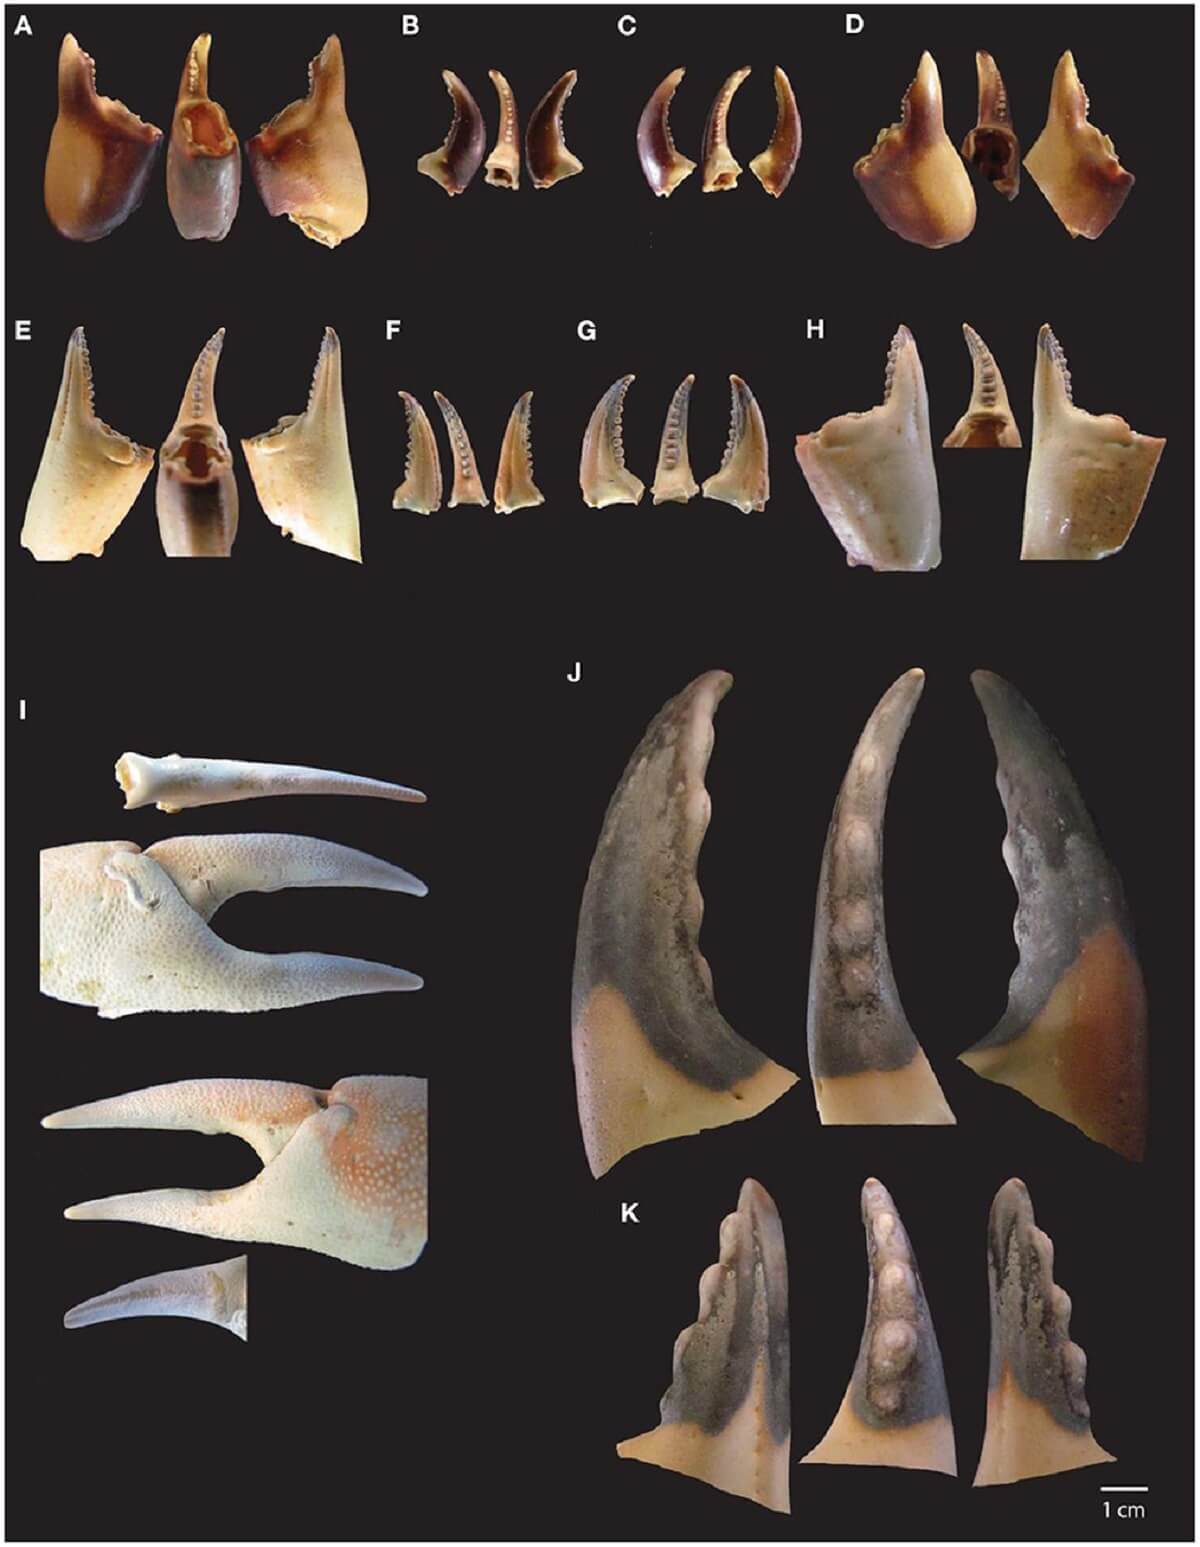 igure 2. Distinctions between crab species based on claw morphology. In some species, left and right claws show some differences, but in other species they are similar. (A–D) Pachygrapsus marmoratus left propodus (A), left dactylopodus (B), right dactylopodus (C) and right propodus (D). (E–H) Carcinus maenas left propodus (E), left dactylopodus (F), right dactylopodus (G) and right propodus (H). (I) Maja squinado right claw right dactylopodus, right claw on anterior side, right claw on dorsal side and right propodus. (J, K) Cancer pagurus right dactylopodus (J) and right propodus (K).